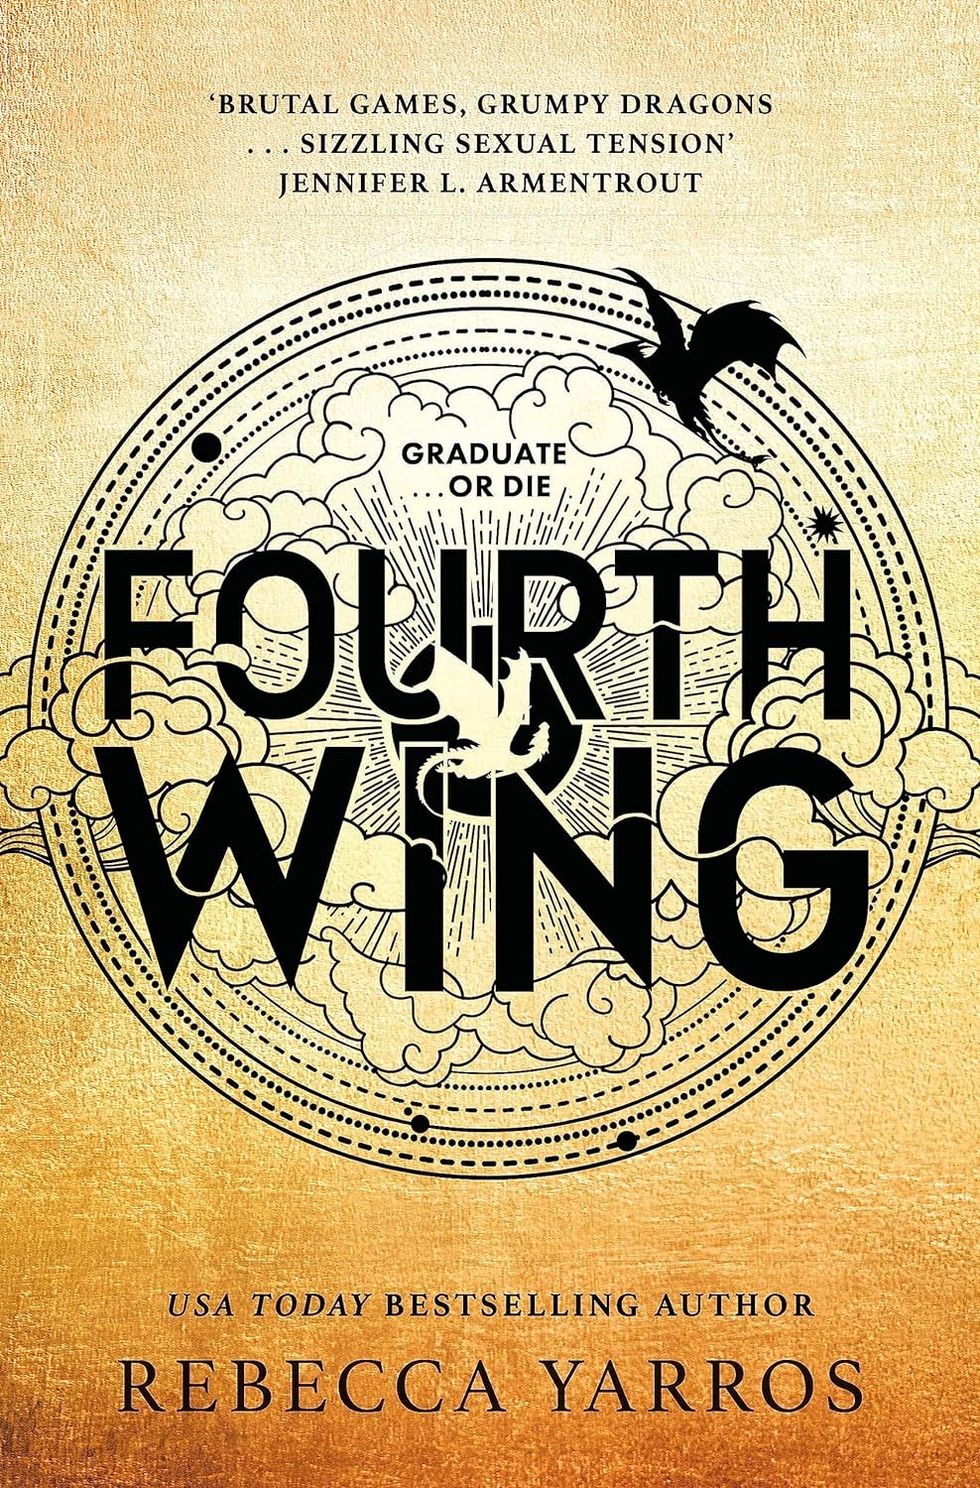 "Fourth Wing" by Rebecca Yarros